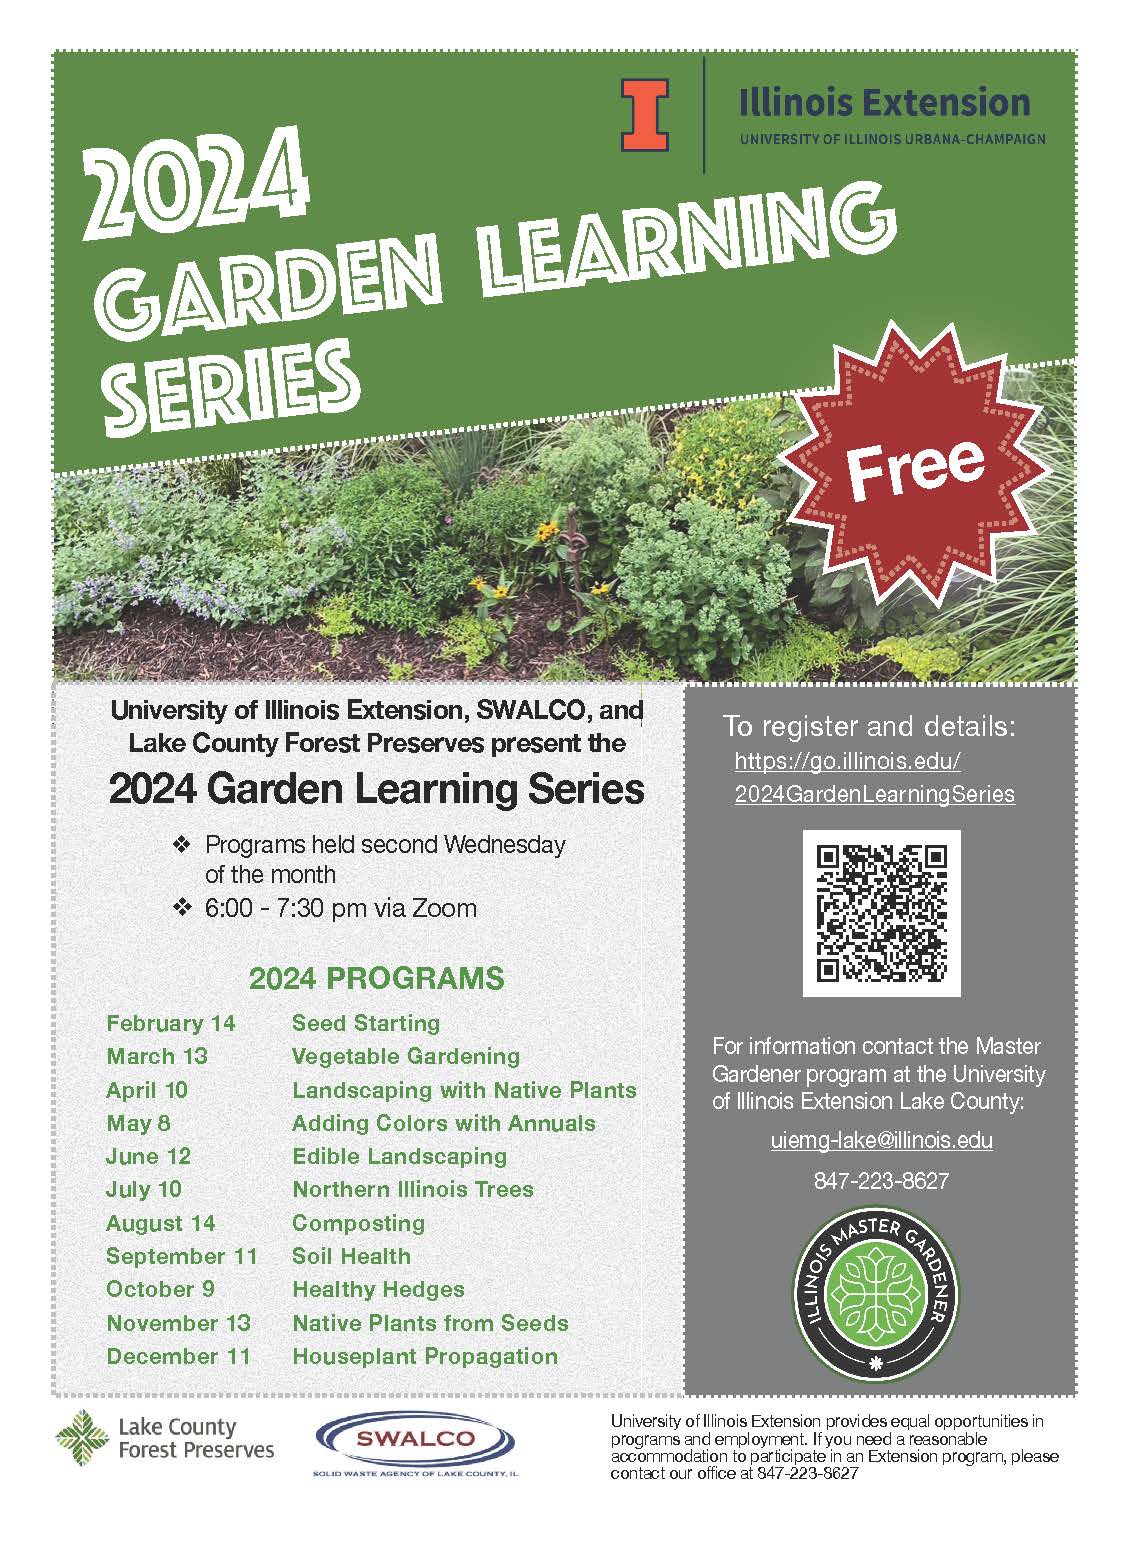 2024 University of Illinois Extension Online Garden Learning Series Announced